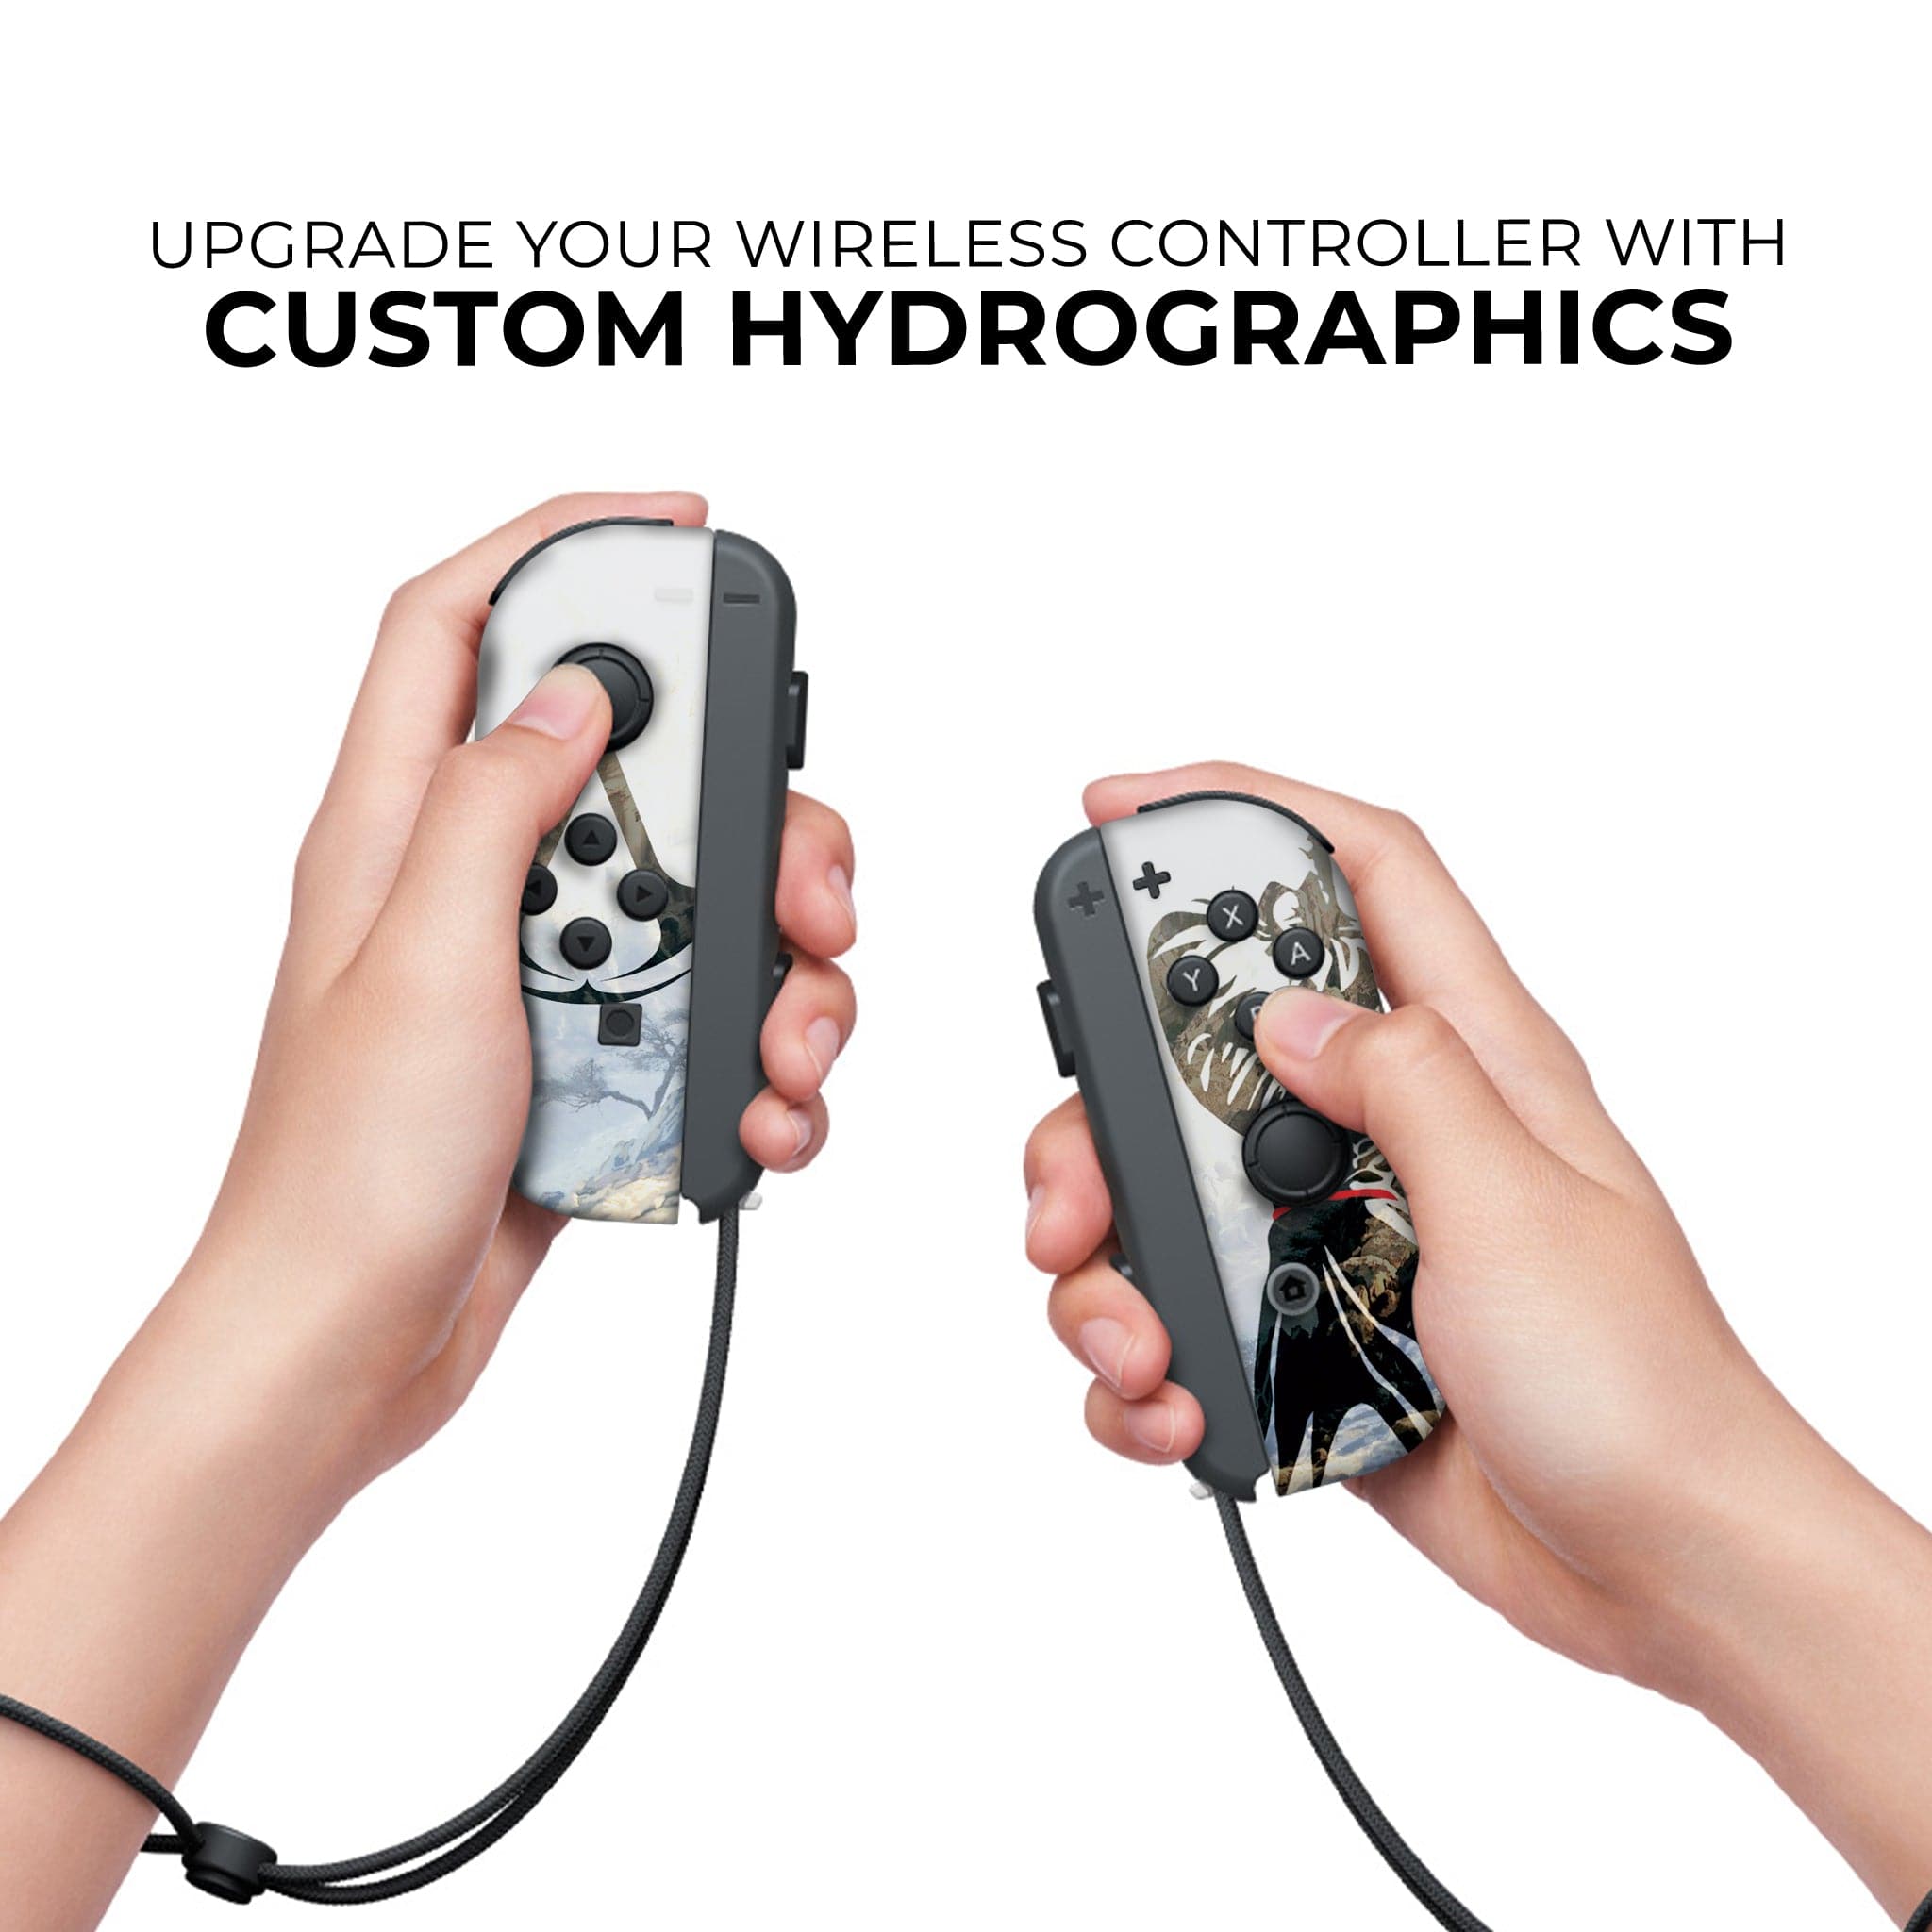 Assasin's Creed Inspired Nintendo Switch Joy-Con Left and Right Switch Controllers by Nintendo